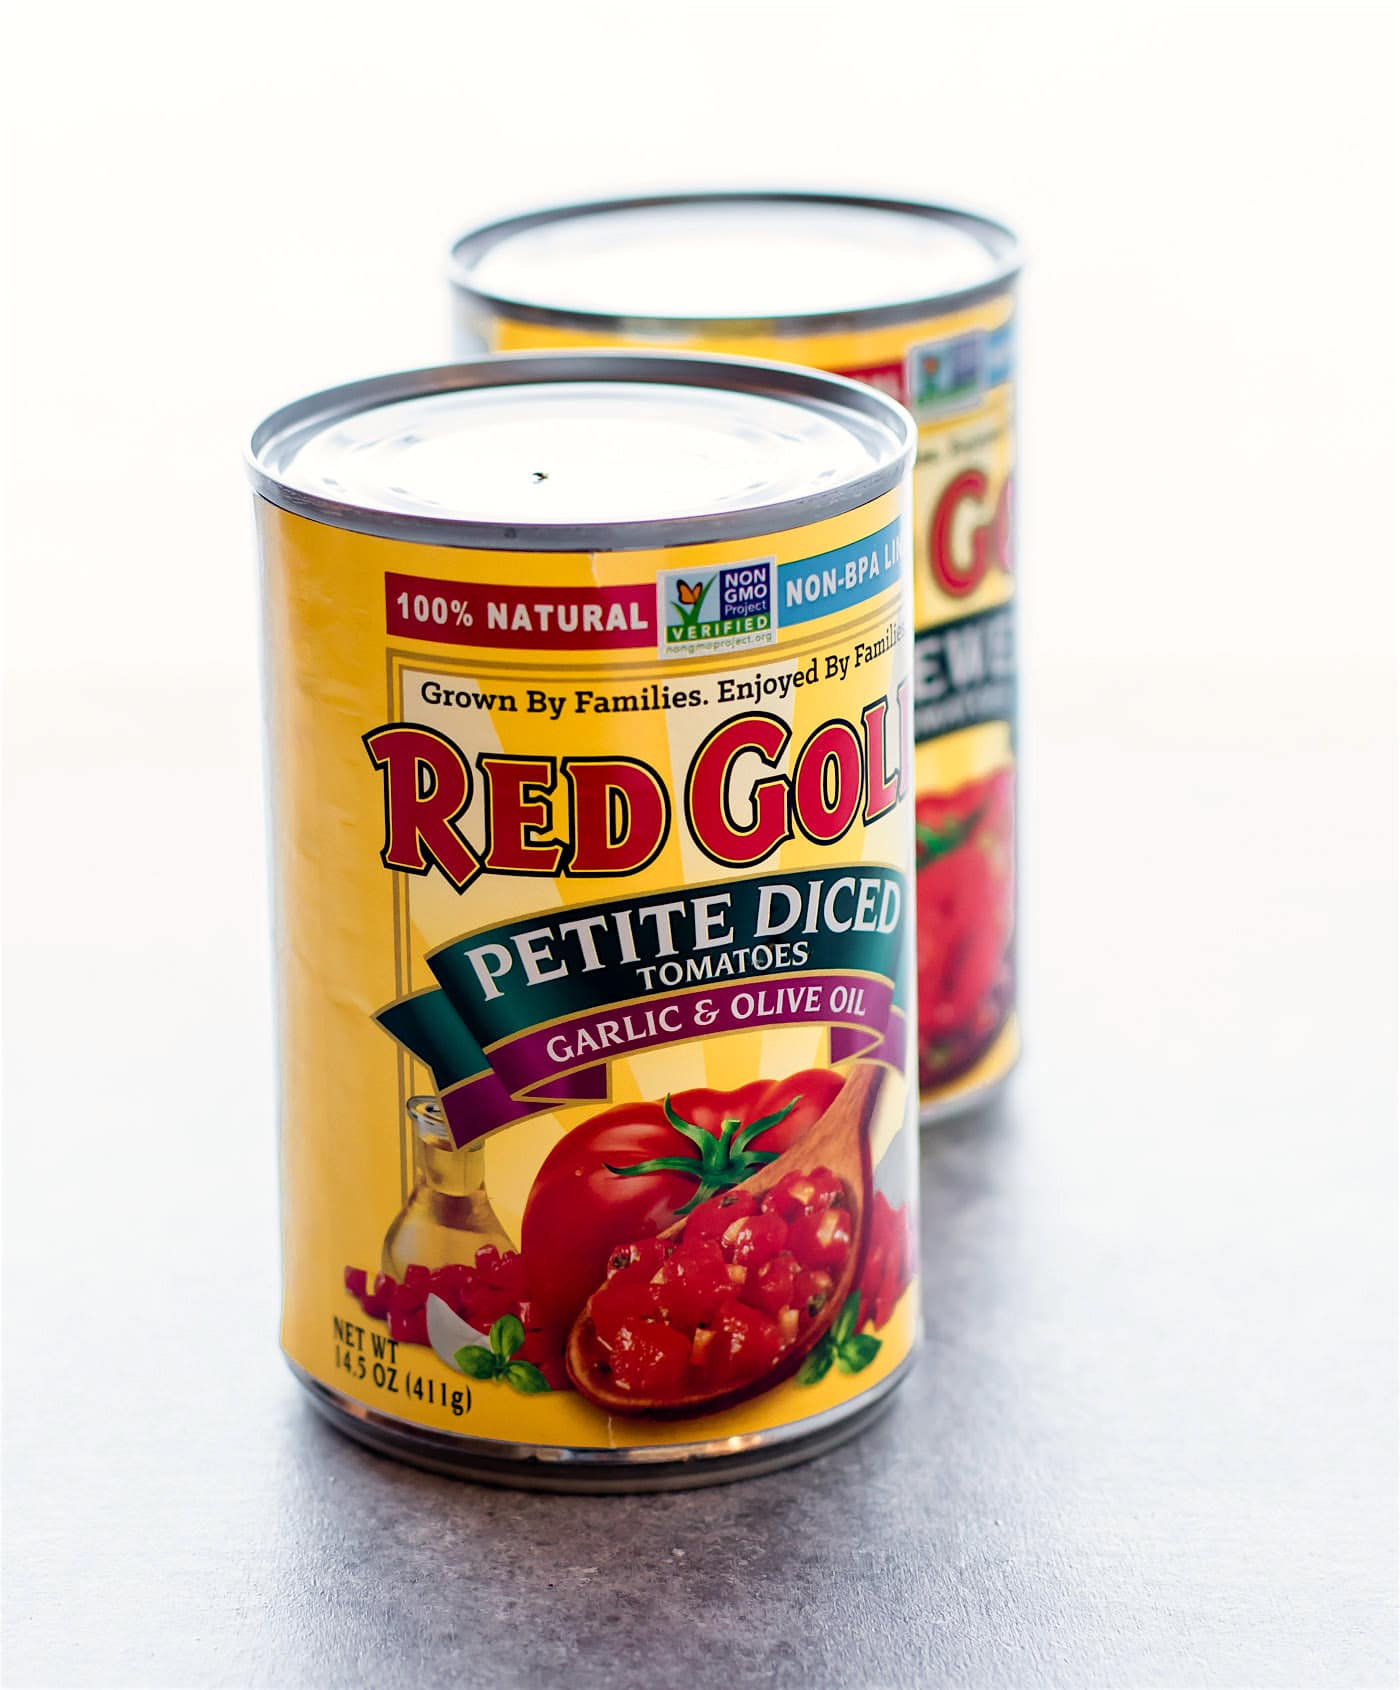 cans of Red Gold petite diced tomatoes